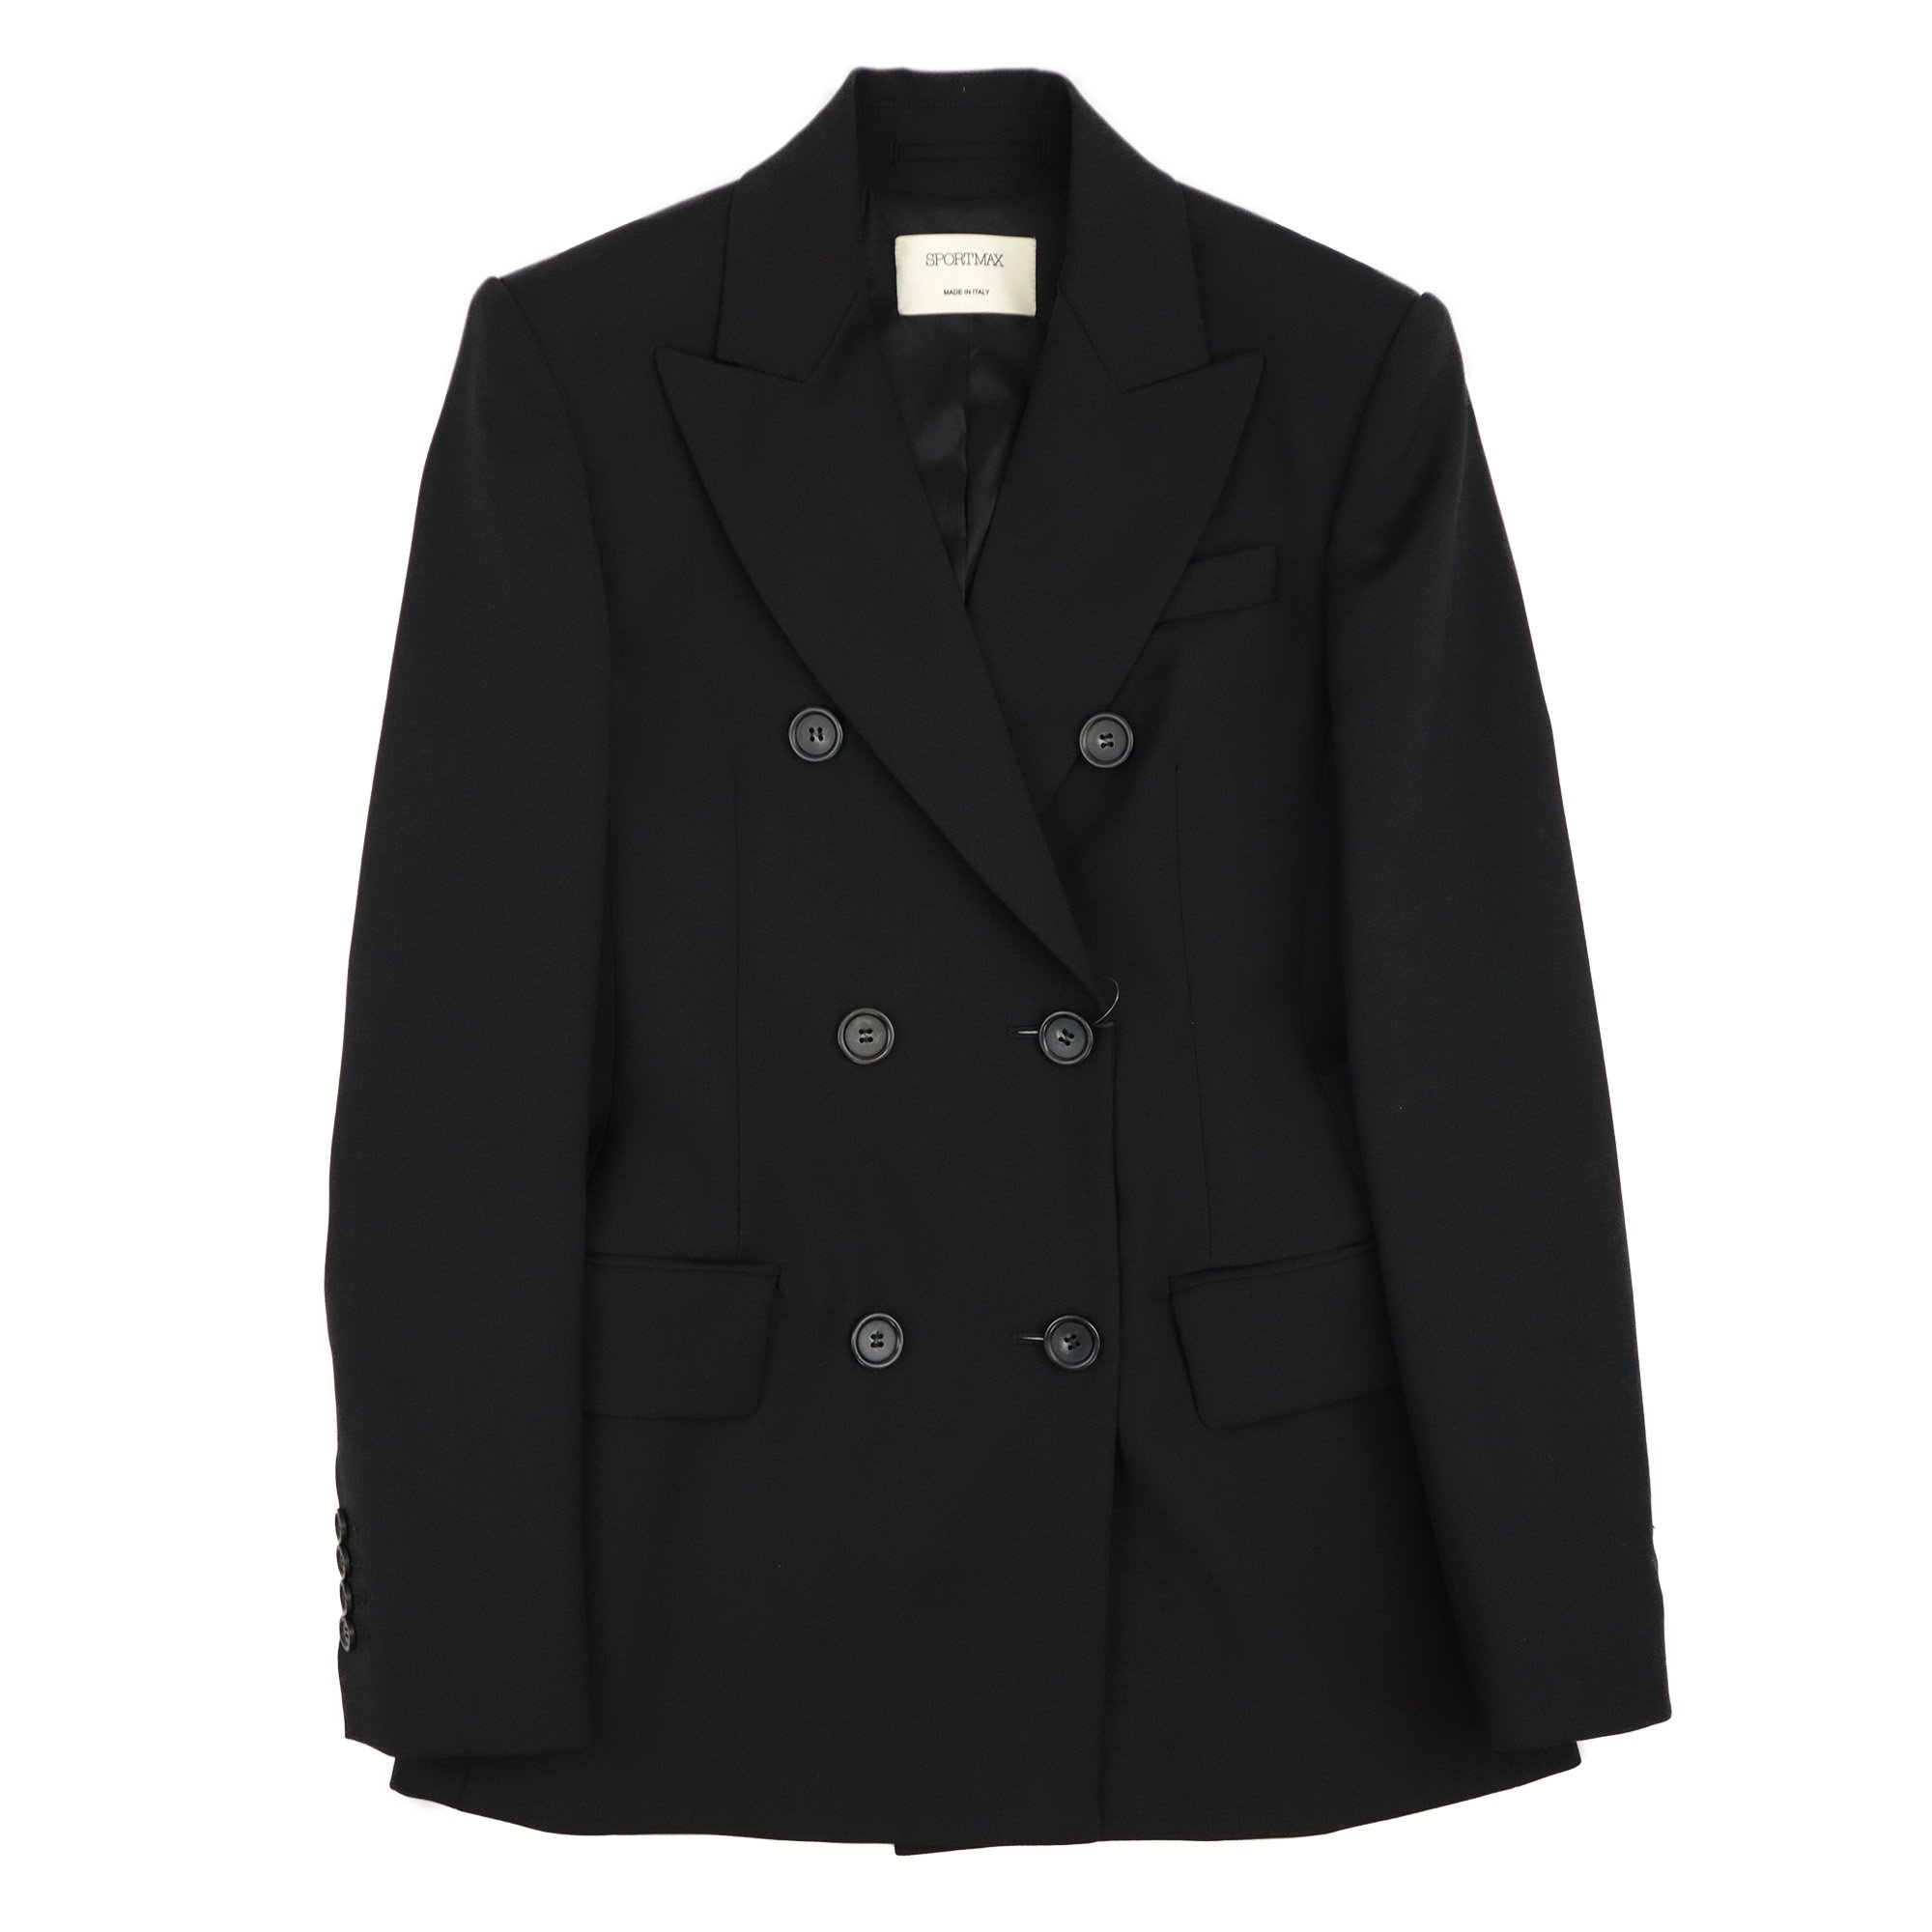 <img class='new_mark_img1' src='https://img.shop-pro.jp/img/new/icons7.gif' style='border:none;display:inline;margin:0px;padding:0px;width:auto;' />SPORT MAX TAILORED JACKET【BLACK】